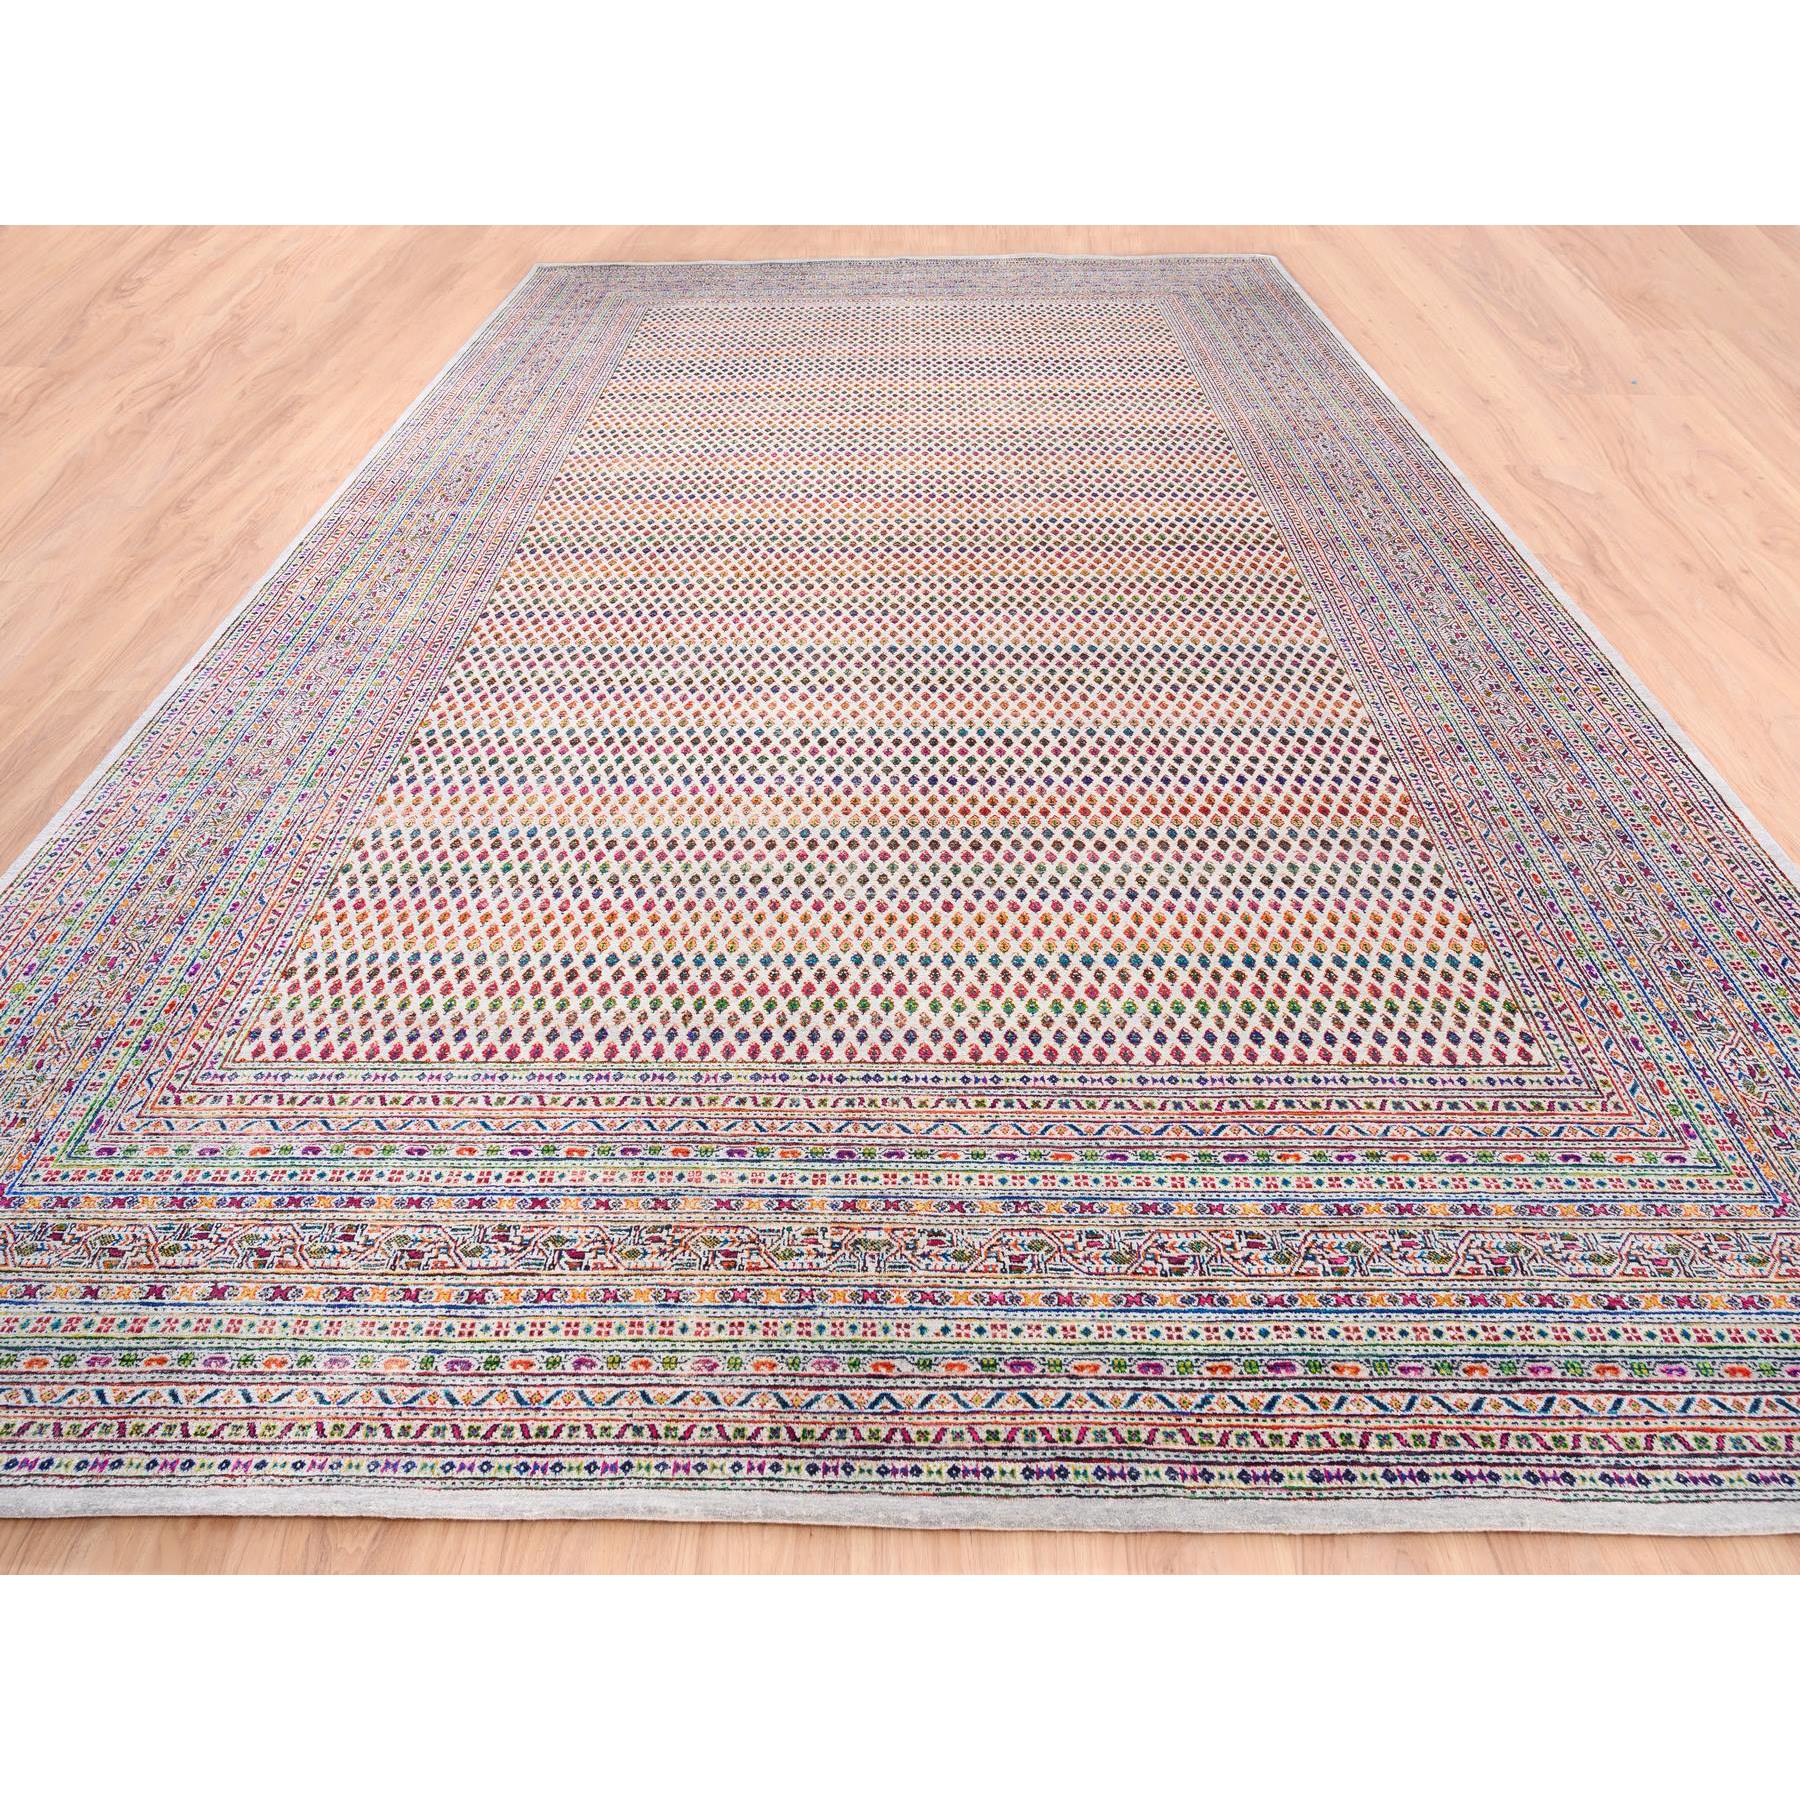 11'7"x18' Oversize Colorful Wool And Sari Silk Sarouk Mir Inspired With Small Repetitive Pattern Hand Woven Oriental Rug 